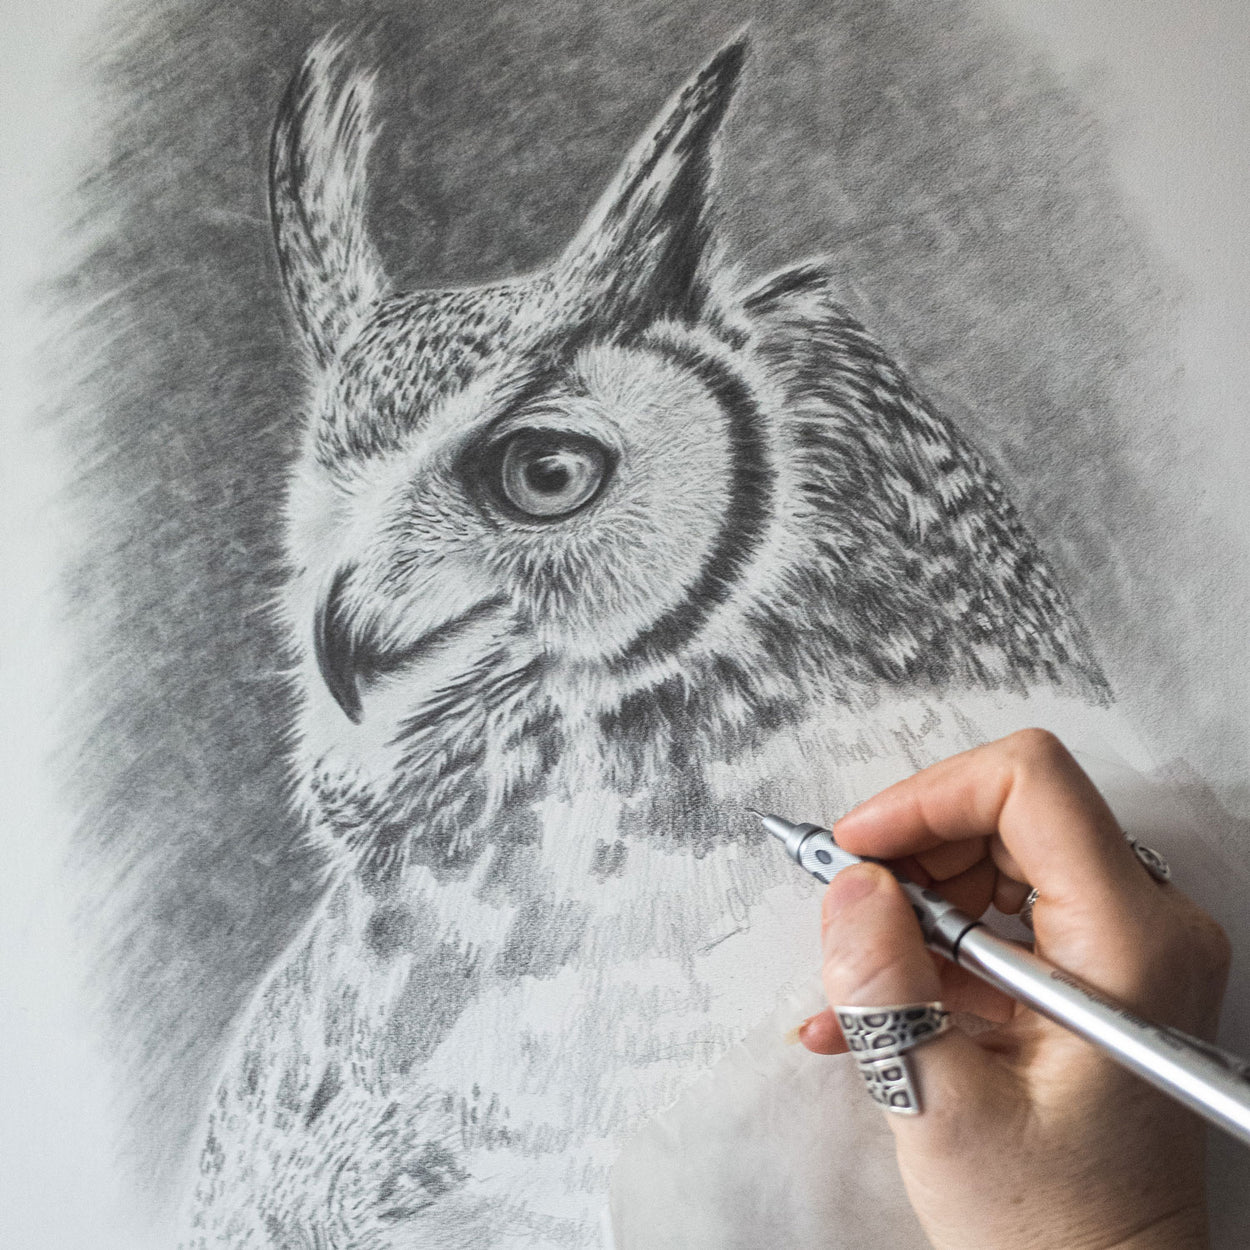 Great Horned Owl Drawing In Progress - The Thriving Wild - Jill Dimond